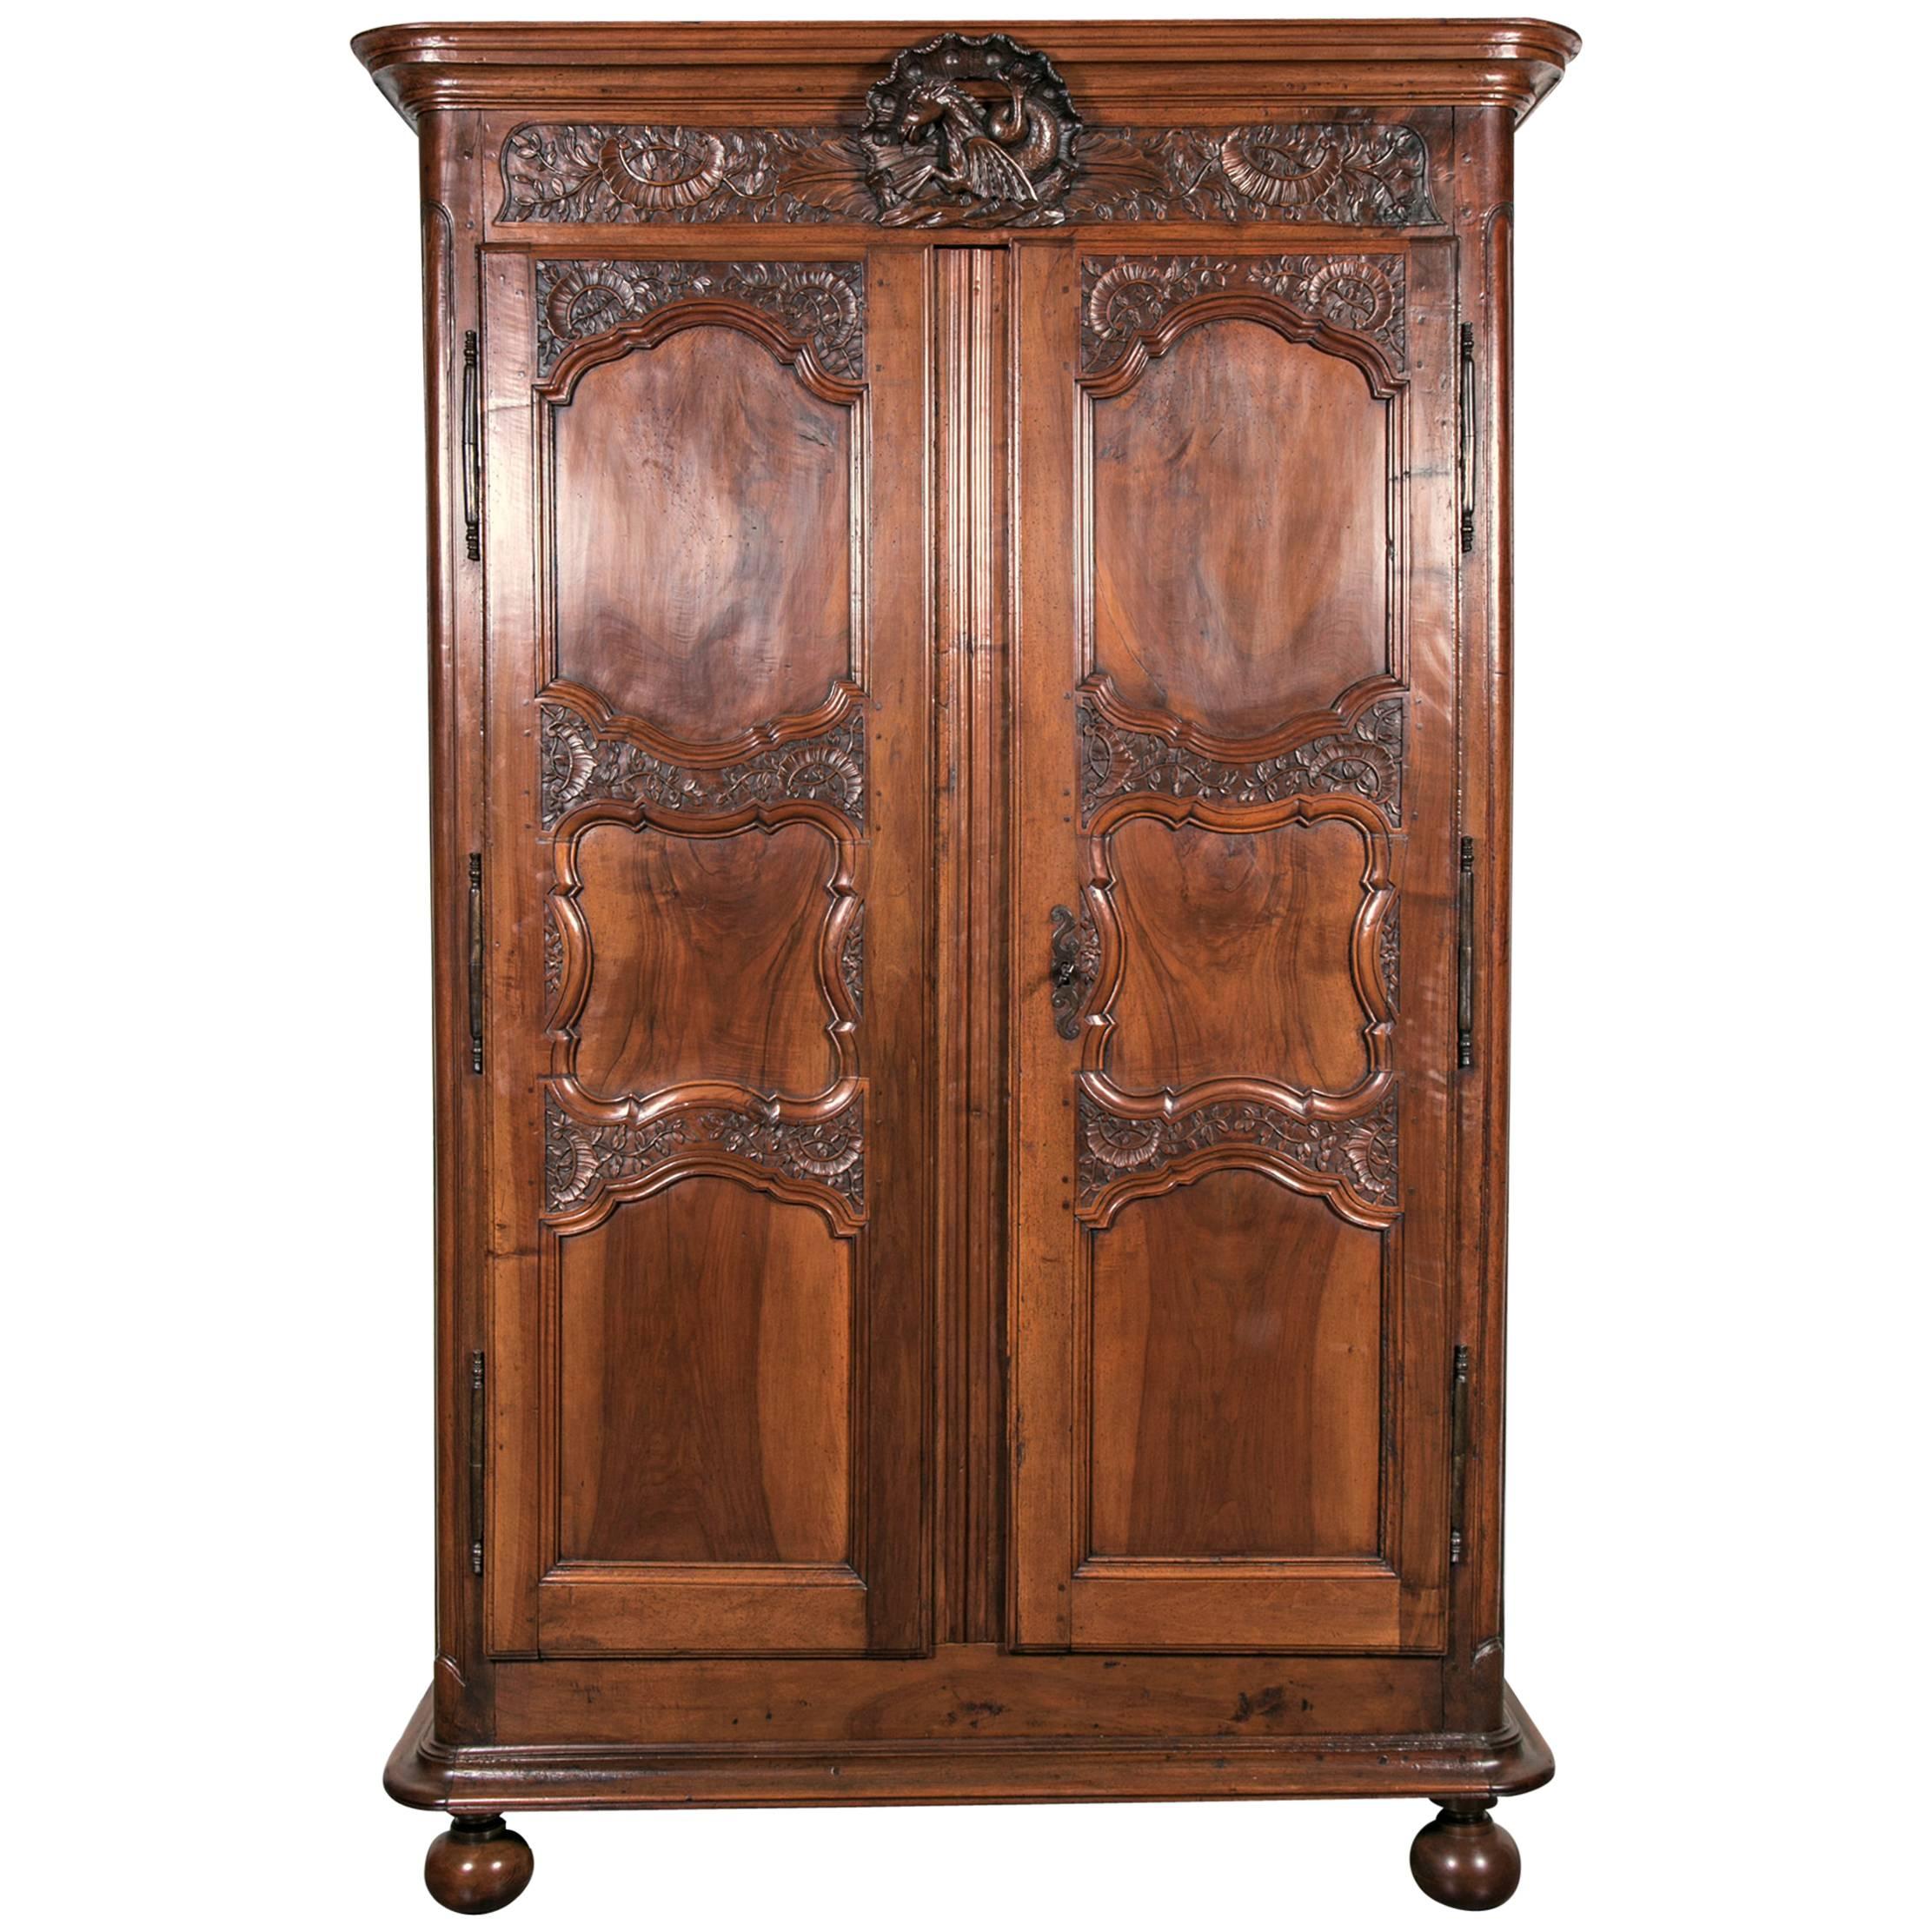 Exceptional Lyonnaise Regence Period Chateau Armoire